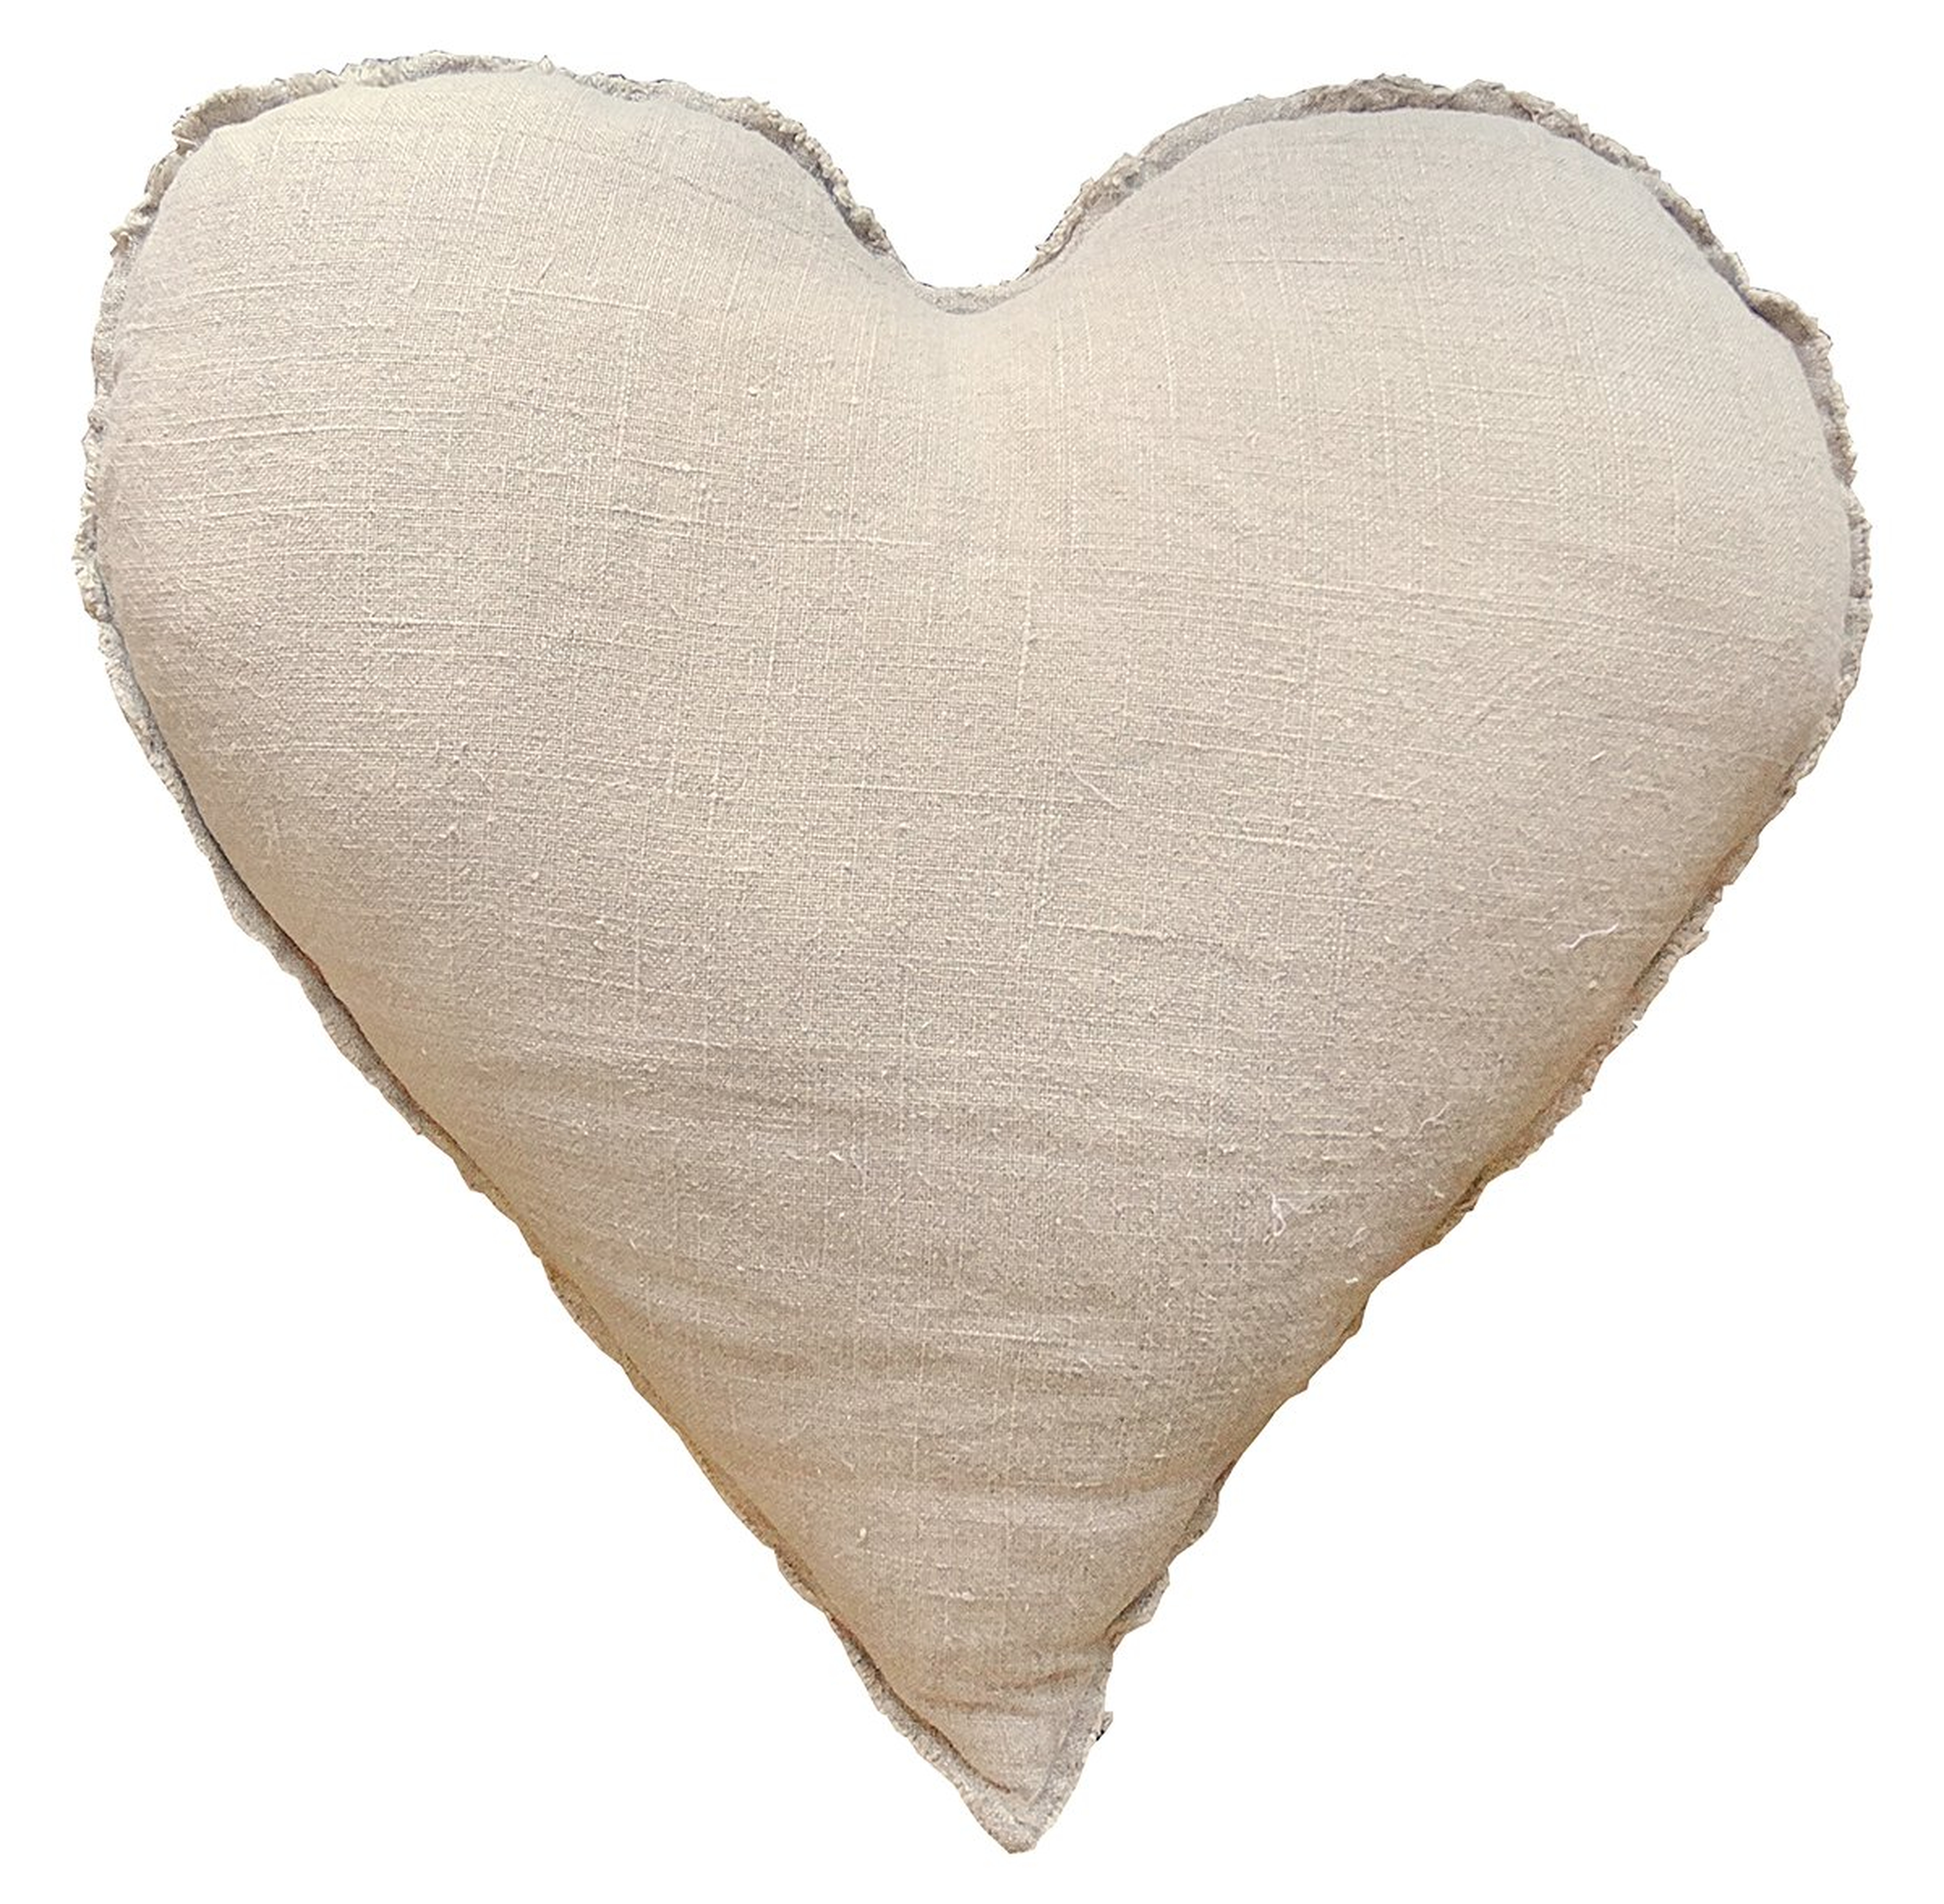 Linen Frayed Edge Rustic Heart Shaped Down Pillow - 24x24 - Kathy Kuo Home